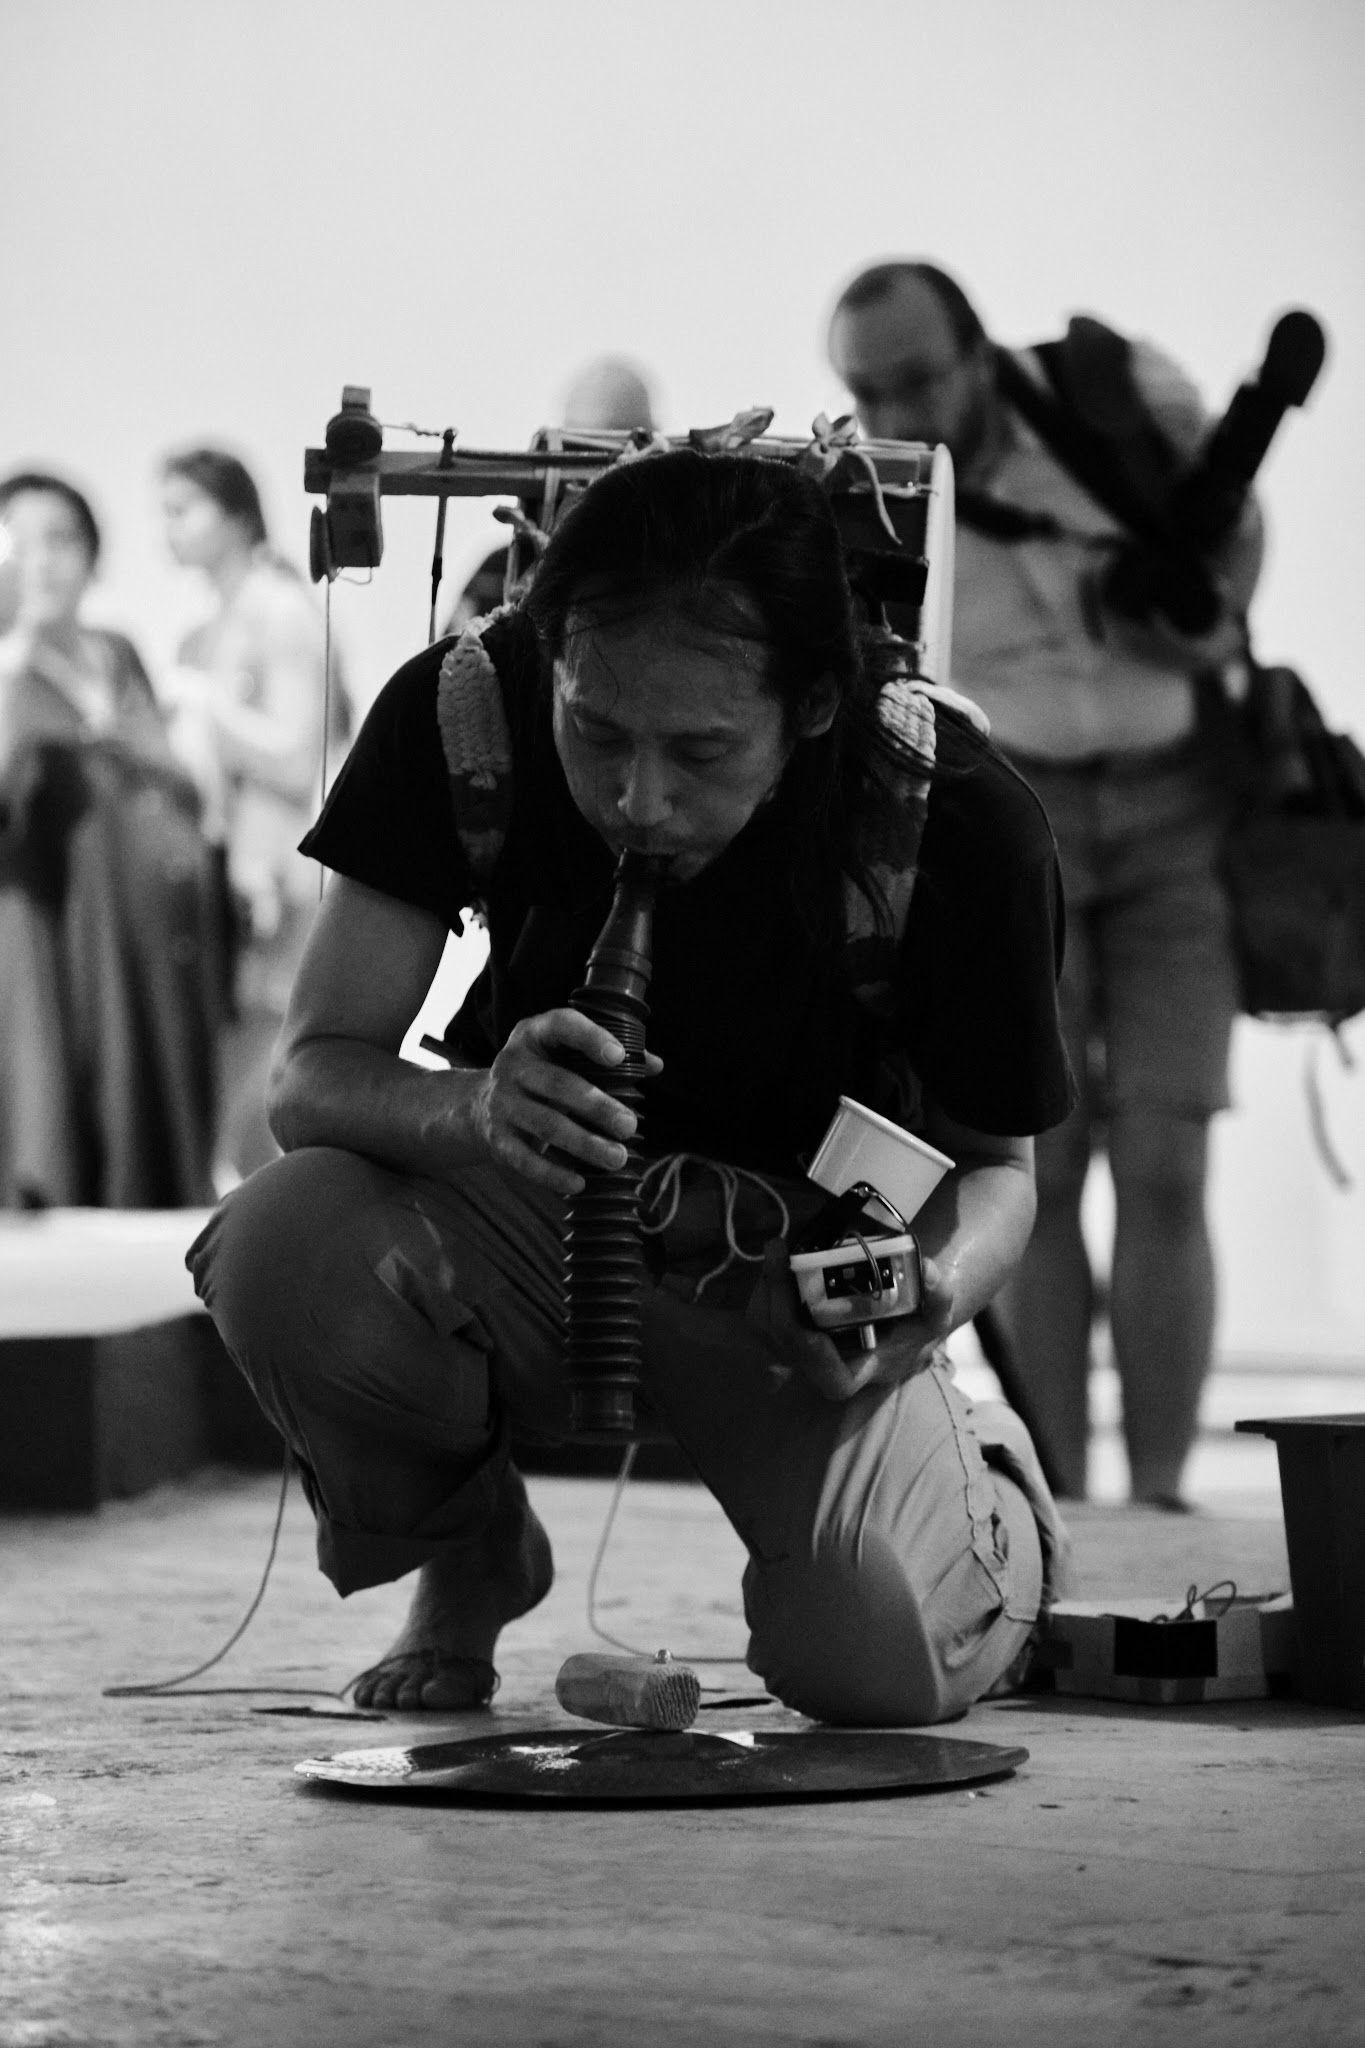 Black and white image of Nao Nishihara's sound performance in Yerevan. His performance is an abstract musical expression in a friendly street style with a drum on his back.